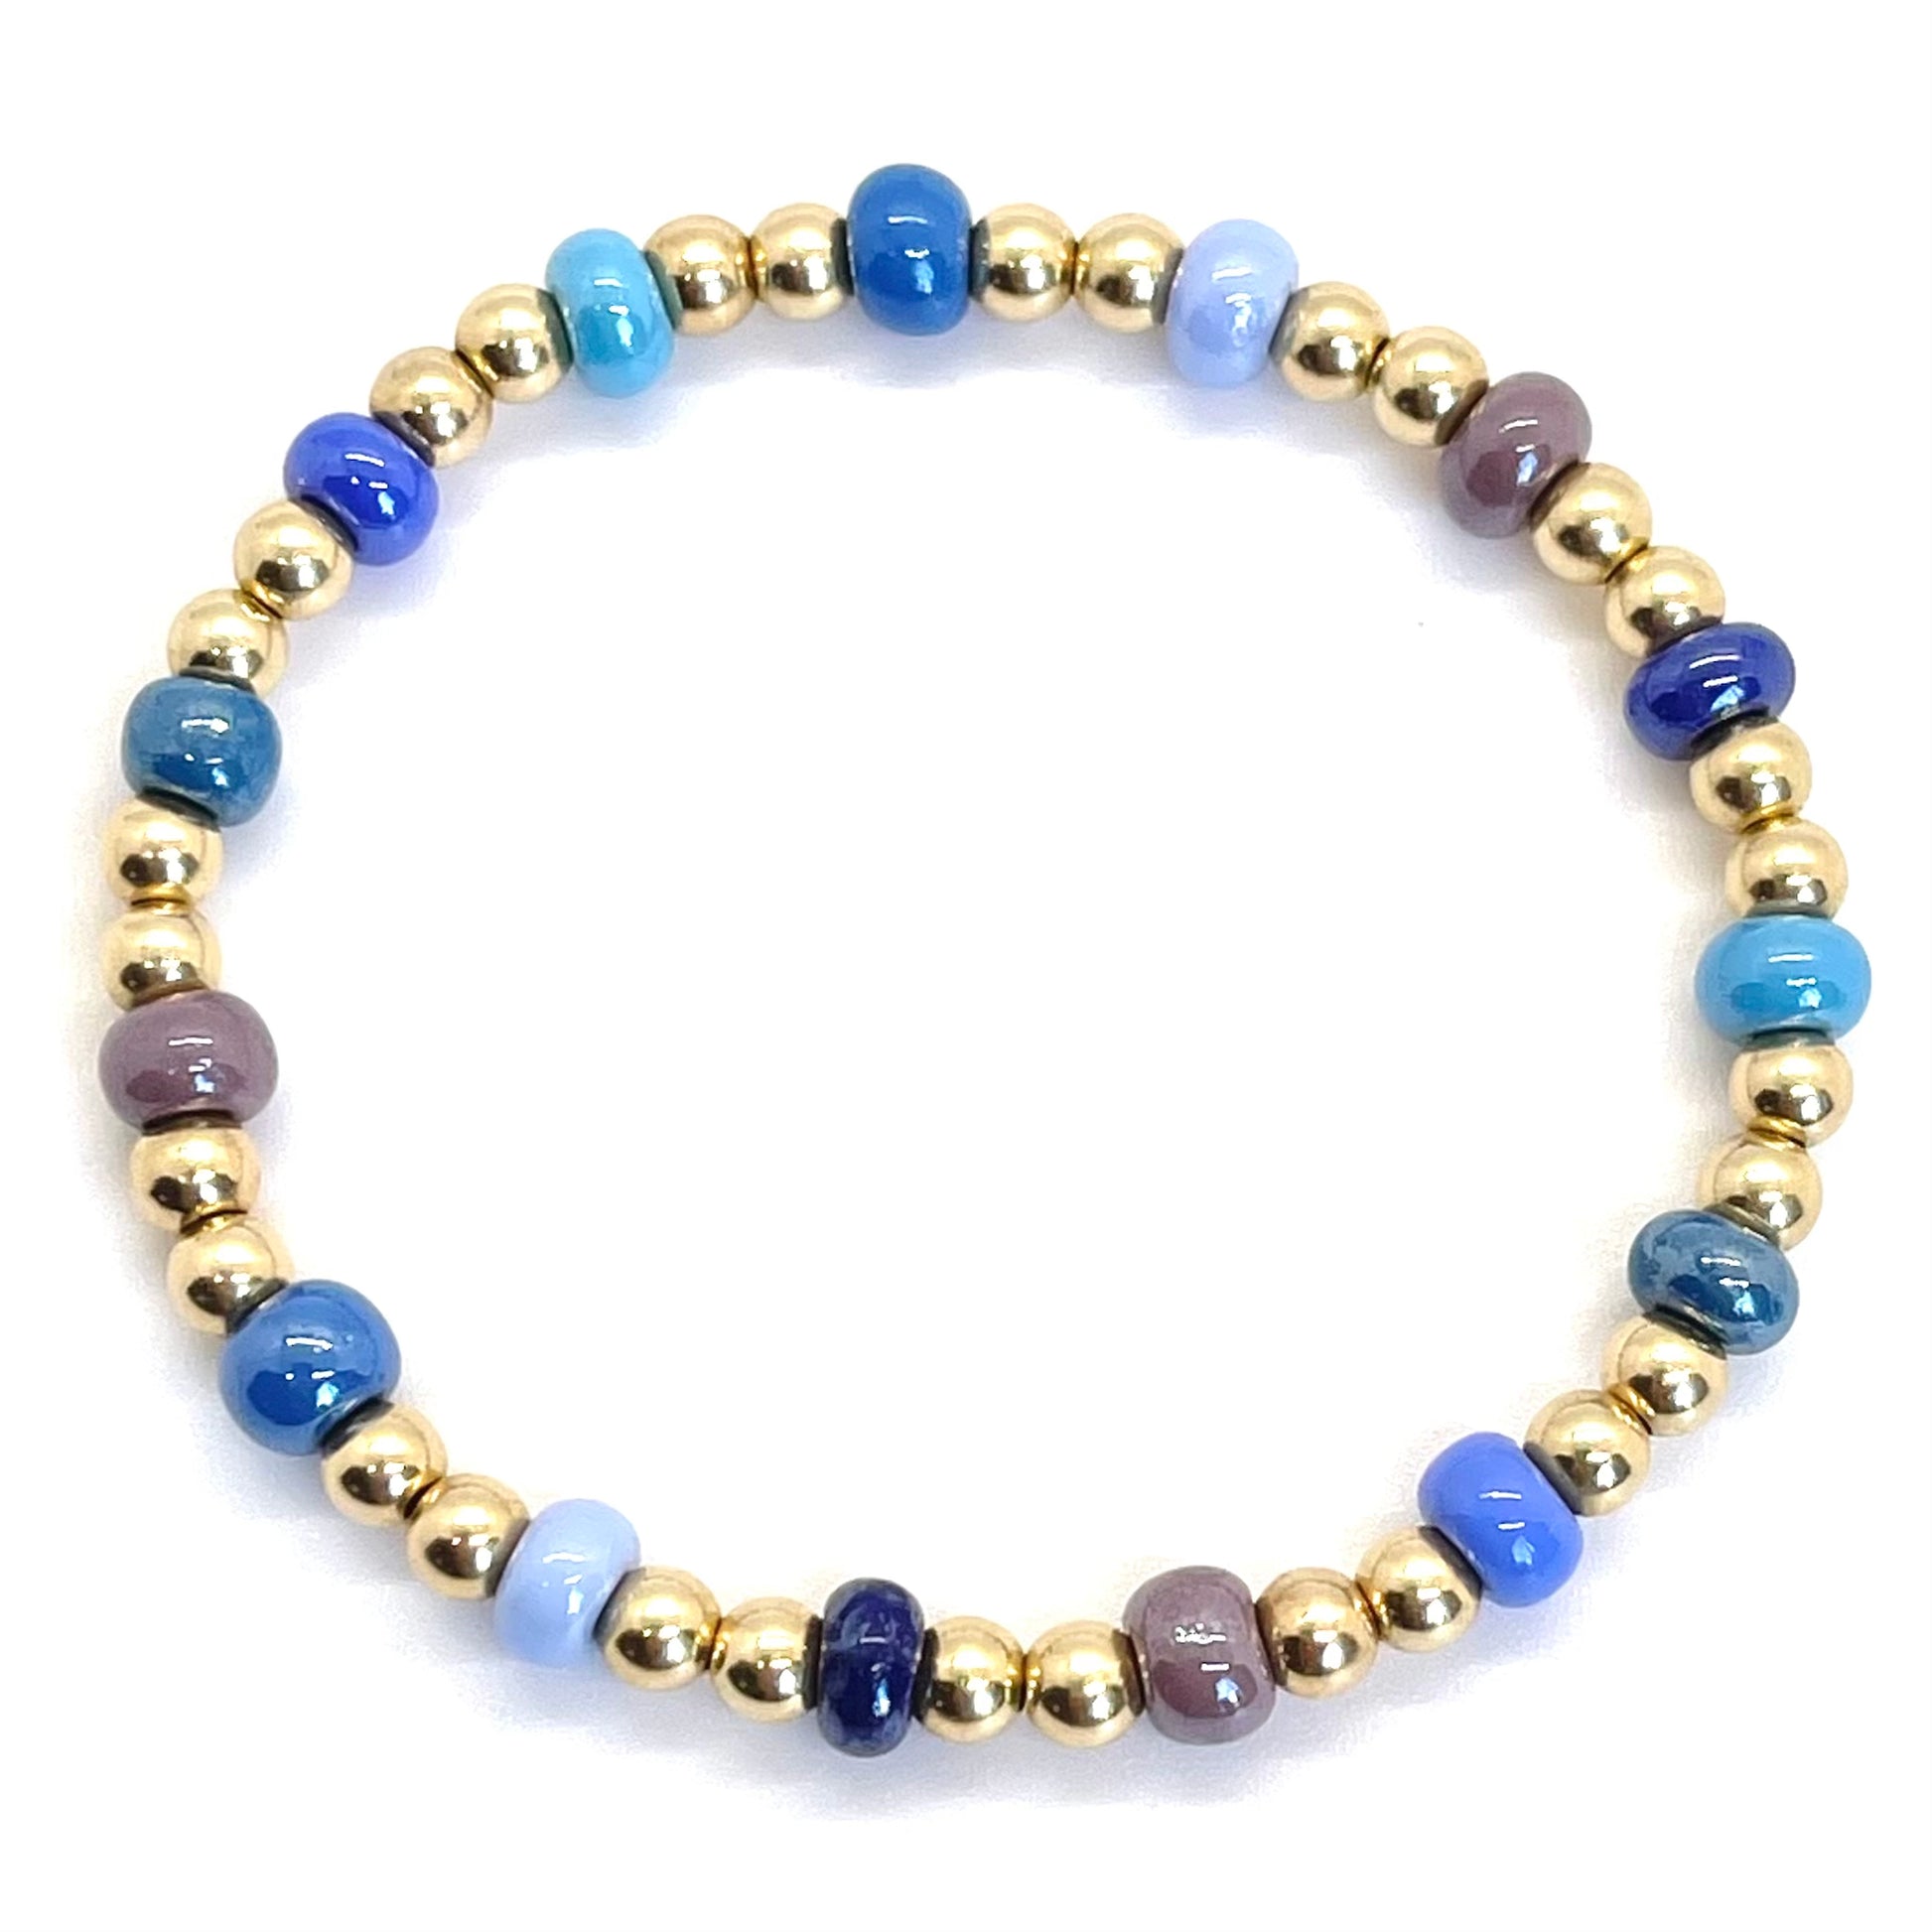 Colorful beaded bracelet with large glass beads in monochromatic shades of blue and 4mm 14K gold filled beads on elastic stretch cord.